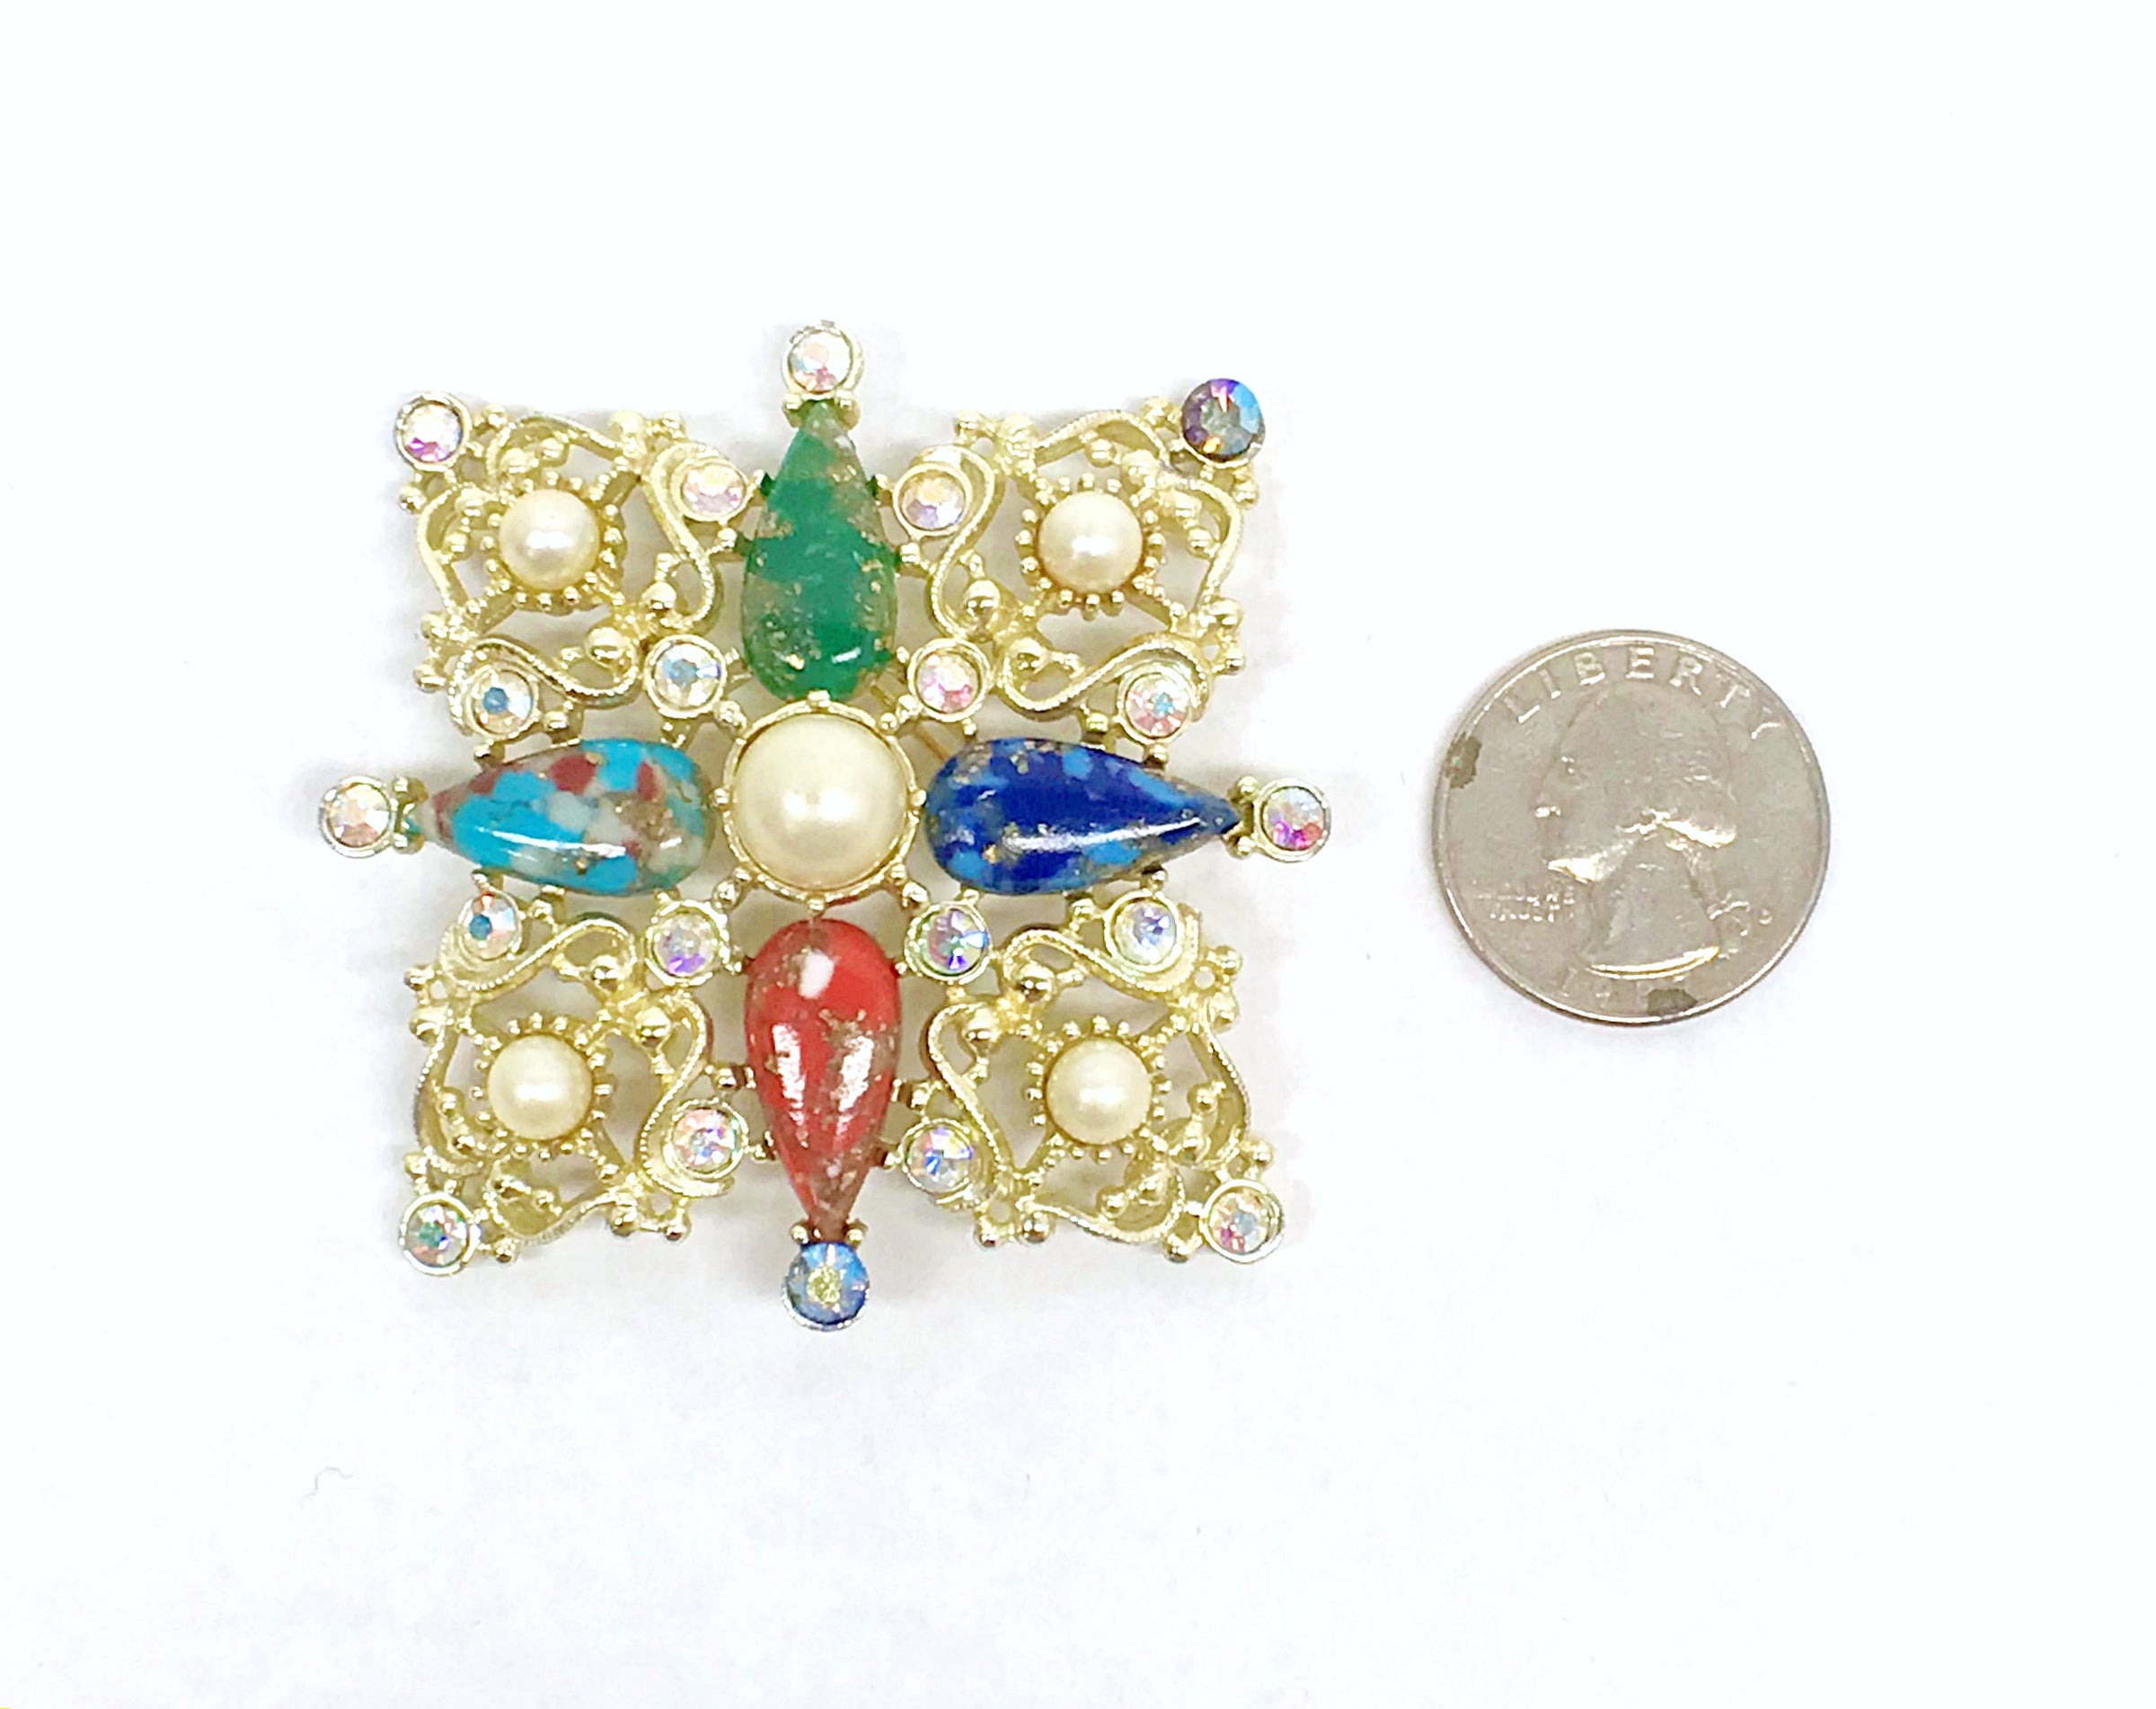 1962 Sarah Coventry Galaxy Collection Brooch or Necklace Pendant - Hers and His Treasures